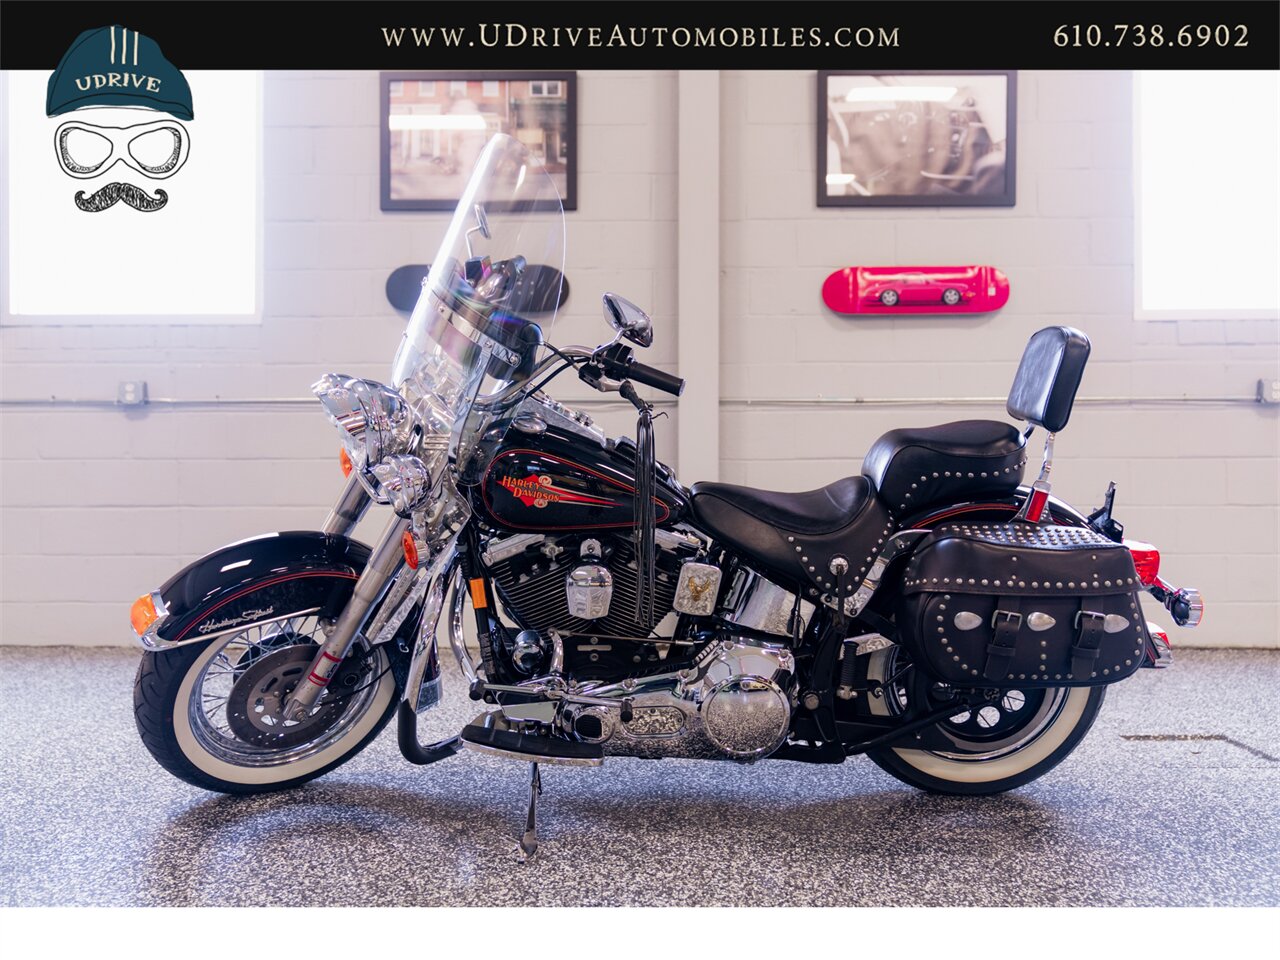 1994 Harley-Davidson Touring FLSTC  Heritage Softail Classic 2k Miles 1 Owner Service History - Photo 1 - West Chester, PA 19382